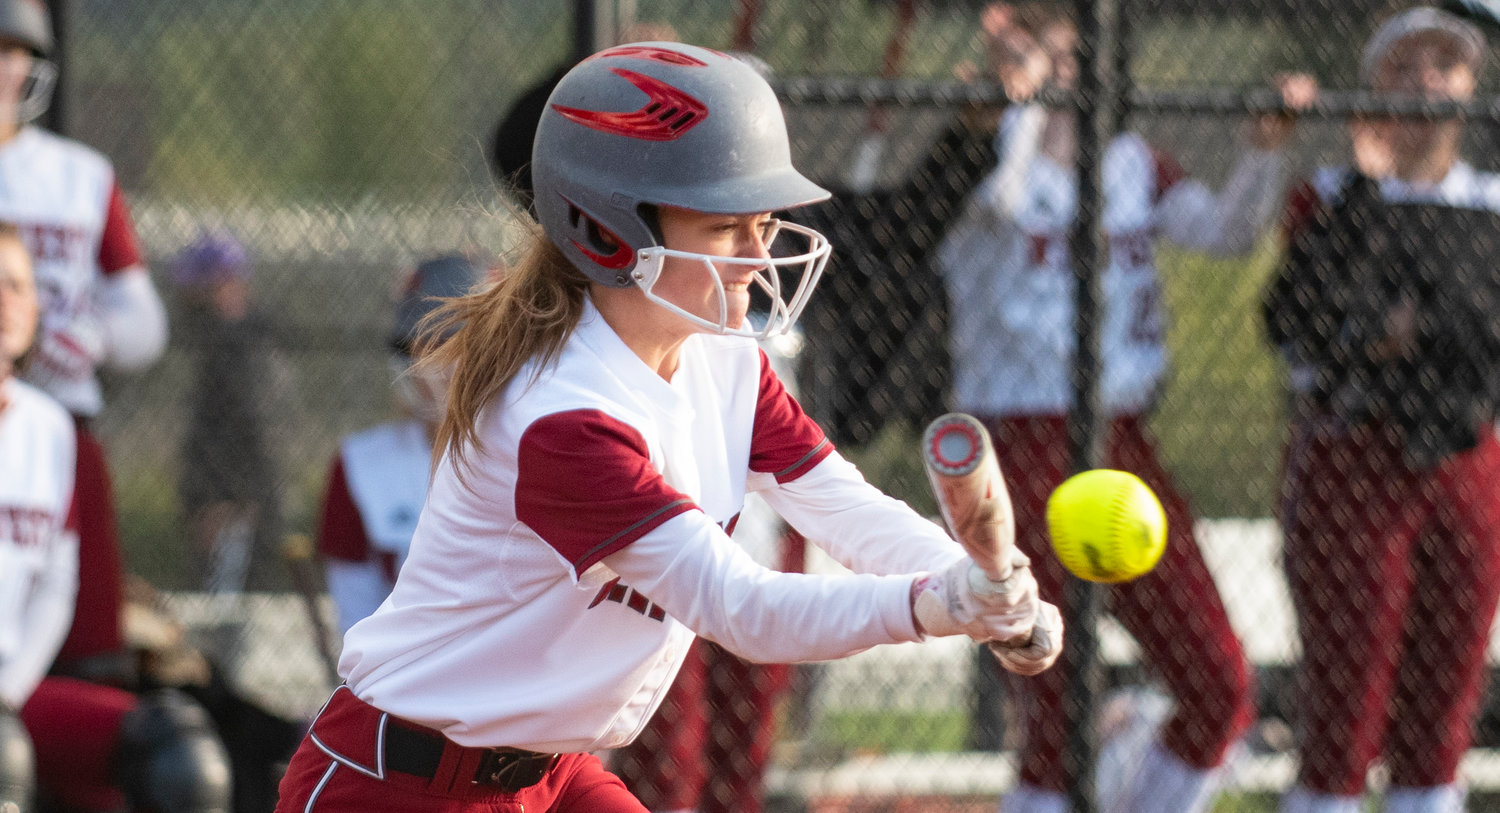 W.F. West sophomore Brielle Etter lays down a bunt to move runners over on Thursday.